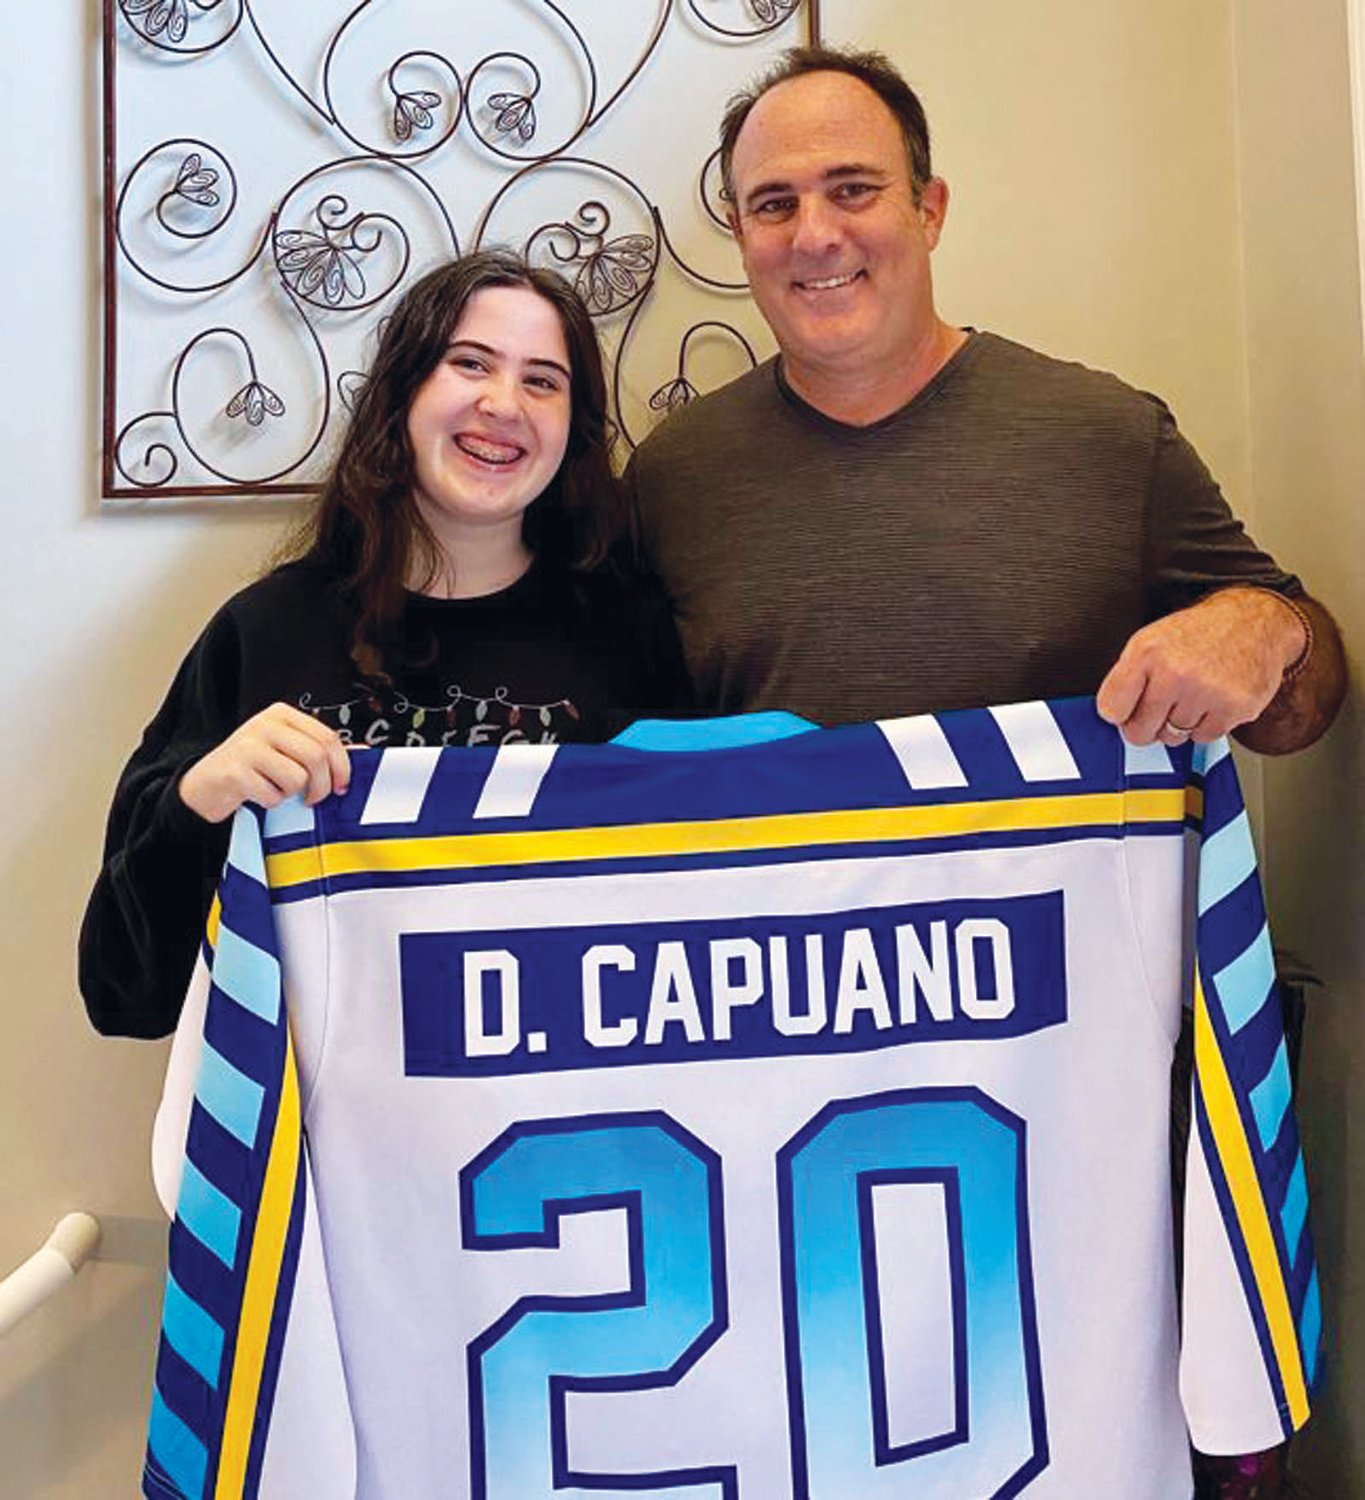 HEADED TO THE HALL: Dave Capuano and his daughter Jaclyn show off the jersey given to members of the RI Hockey Hall of Fame. Capuano will be inducted later this month as a member of the 2020 class.